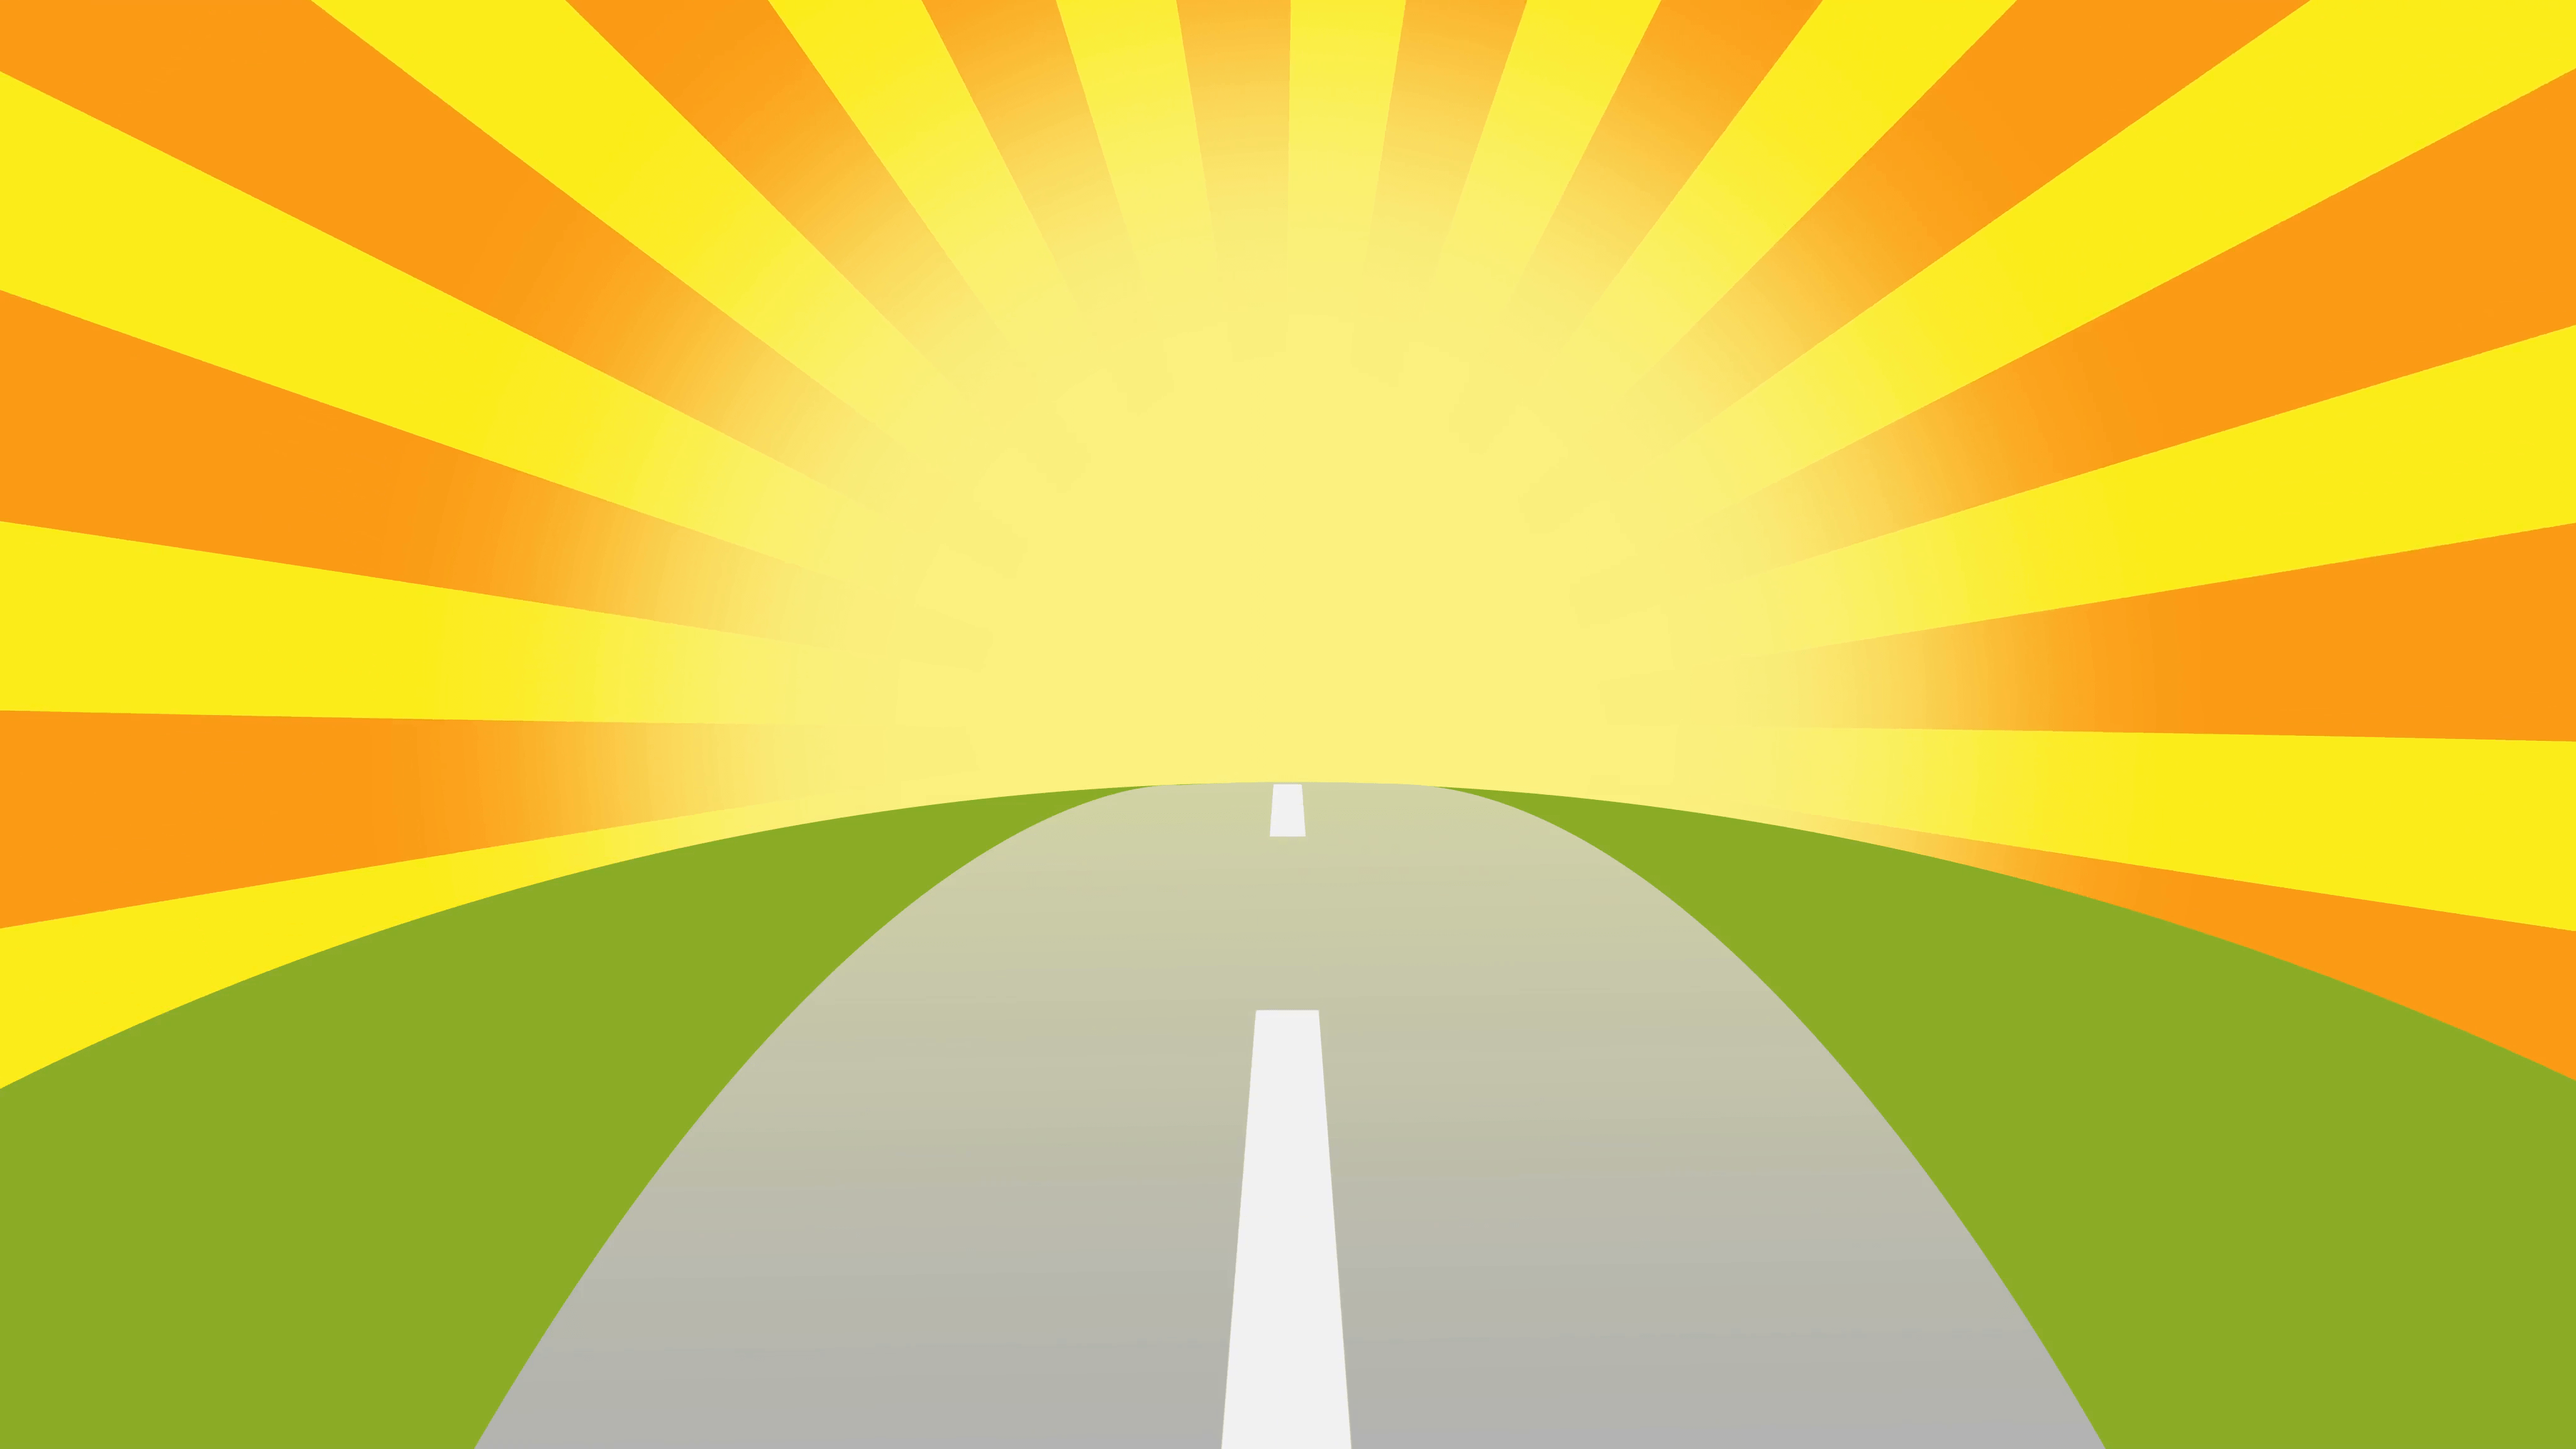 Animated road on a sunset with space for your object, text or logo